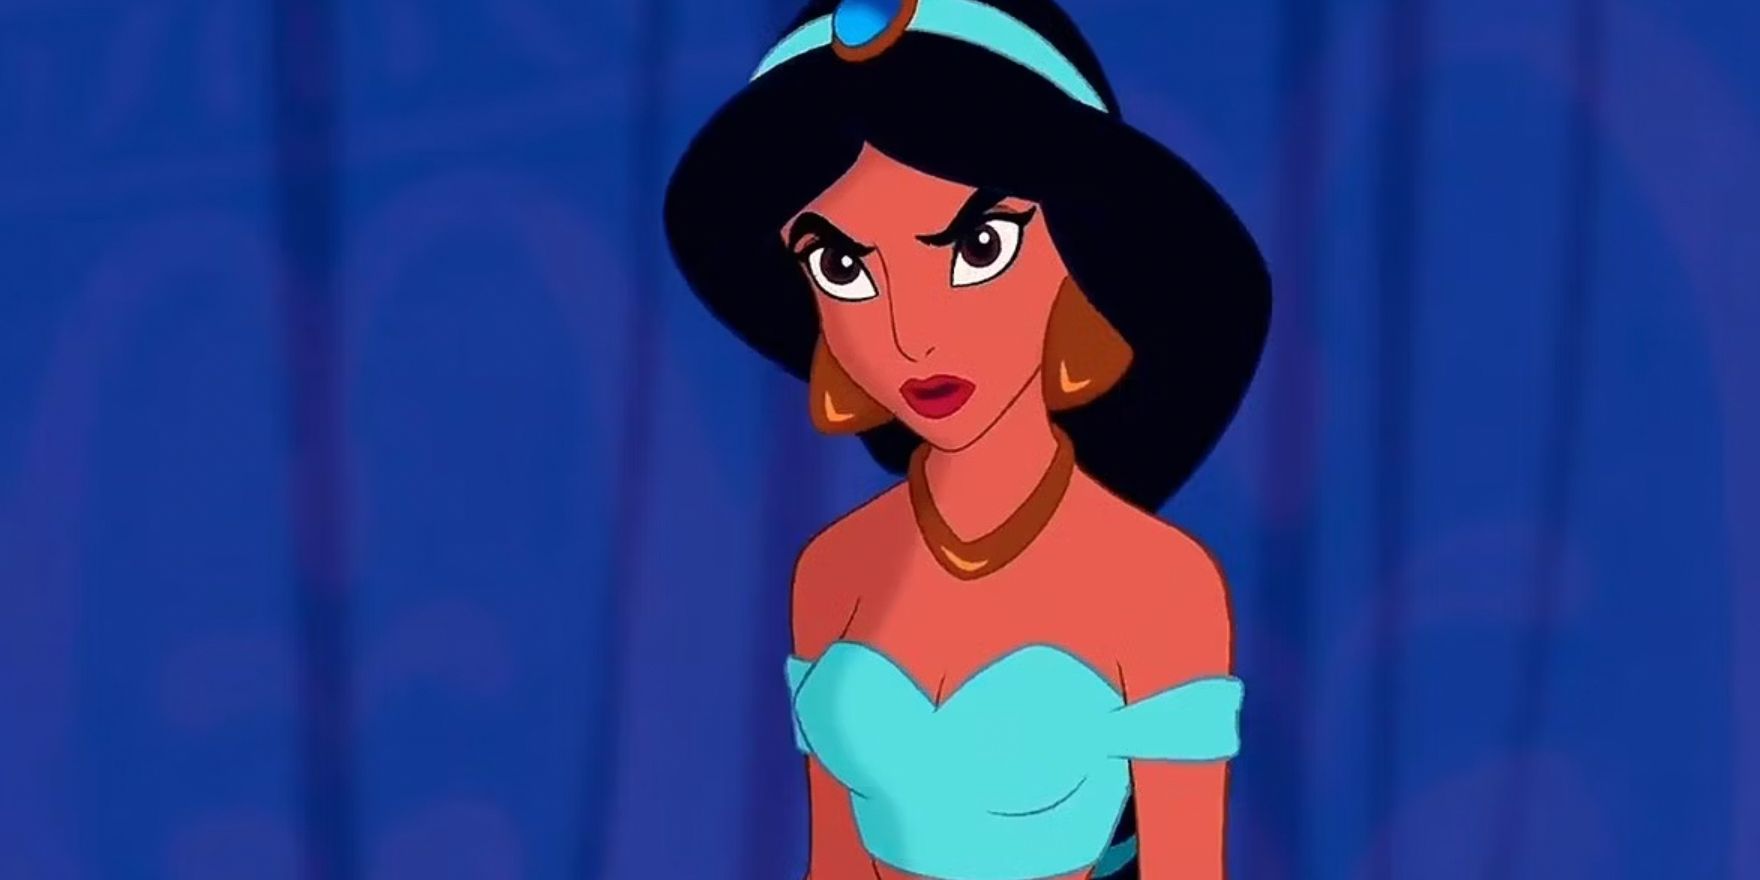 Jasmine is angry in the animated Aladdin movie